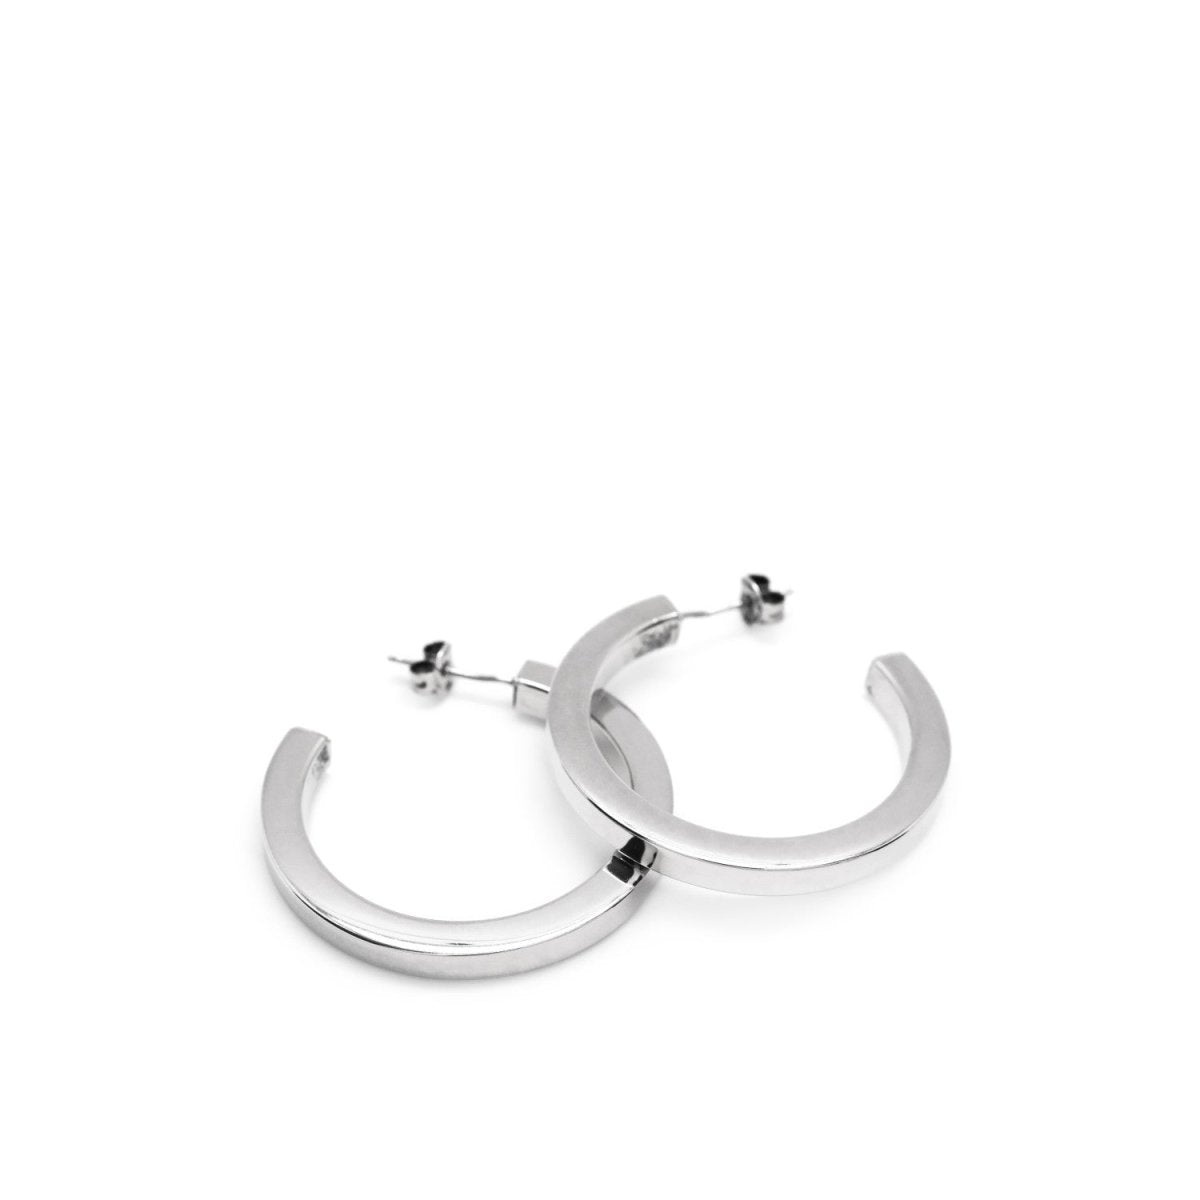 Earrings - Thick and square large silver hoop earrings